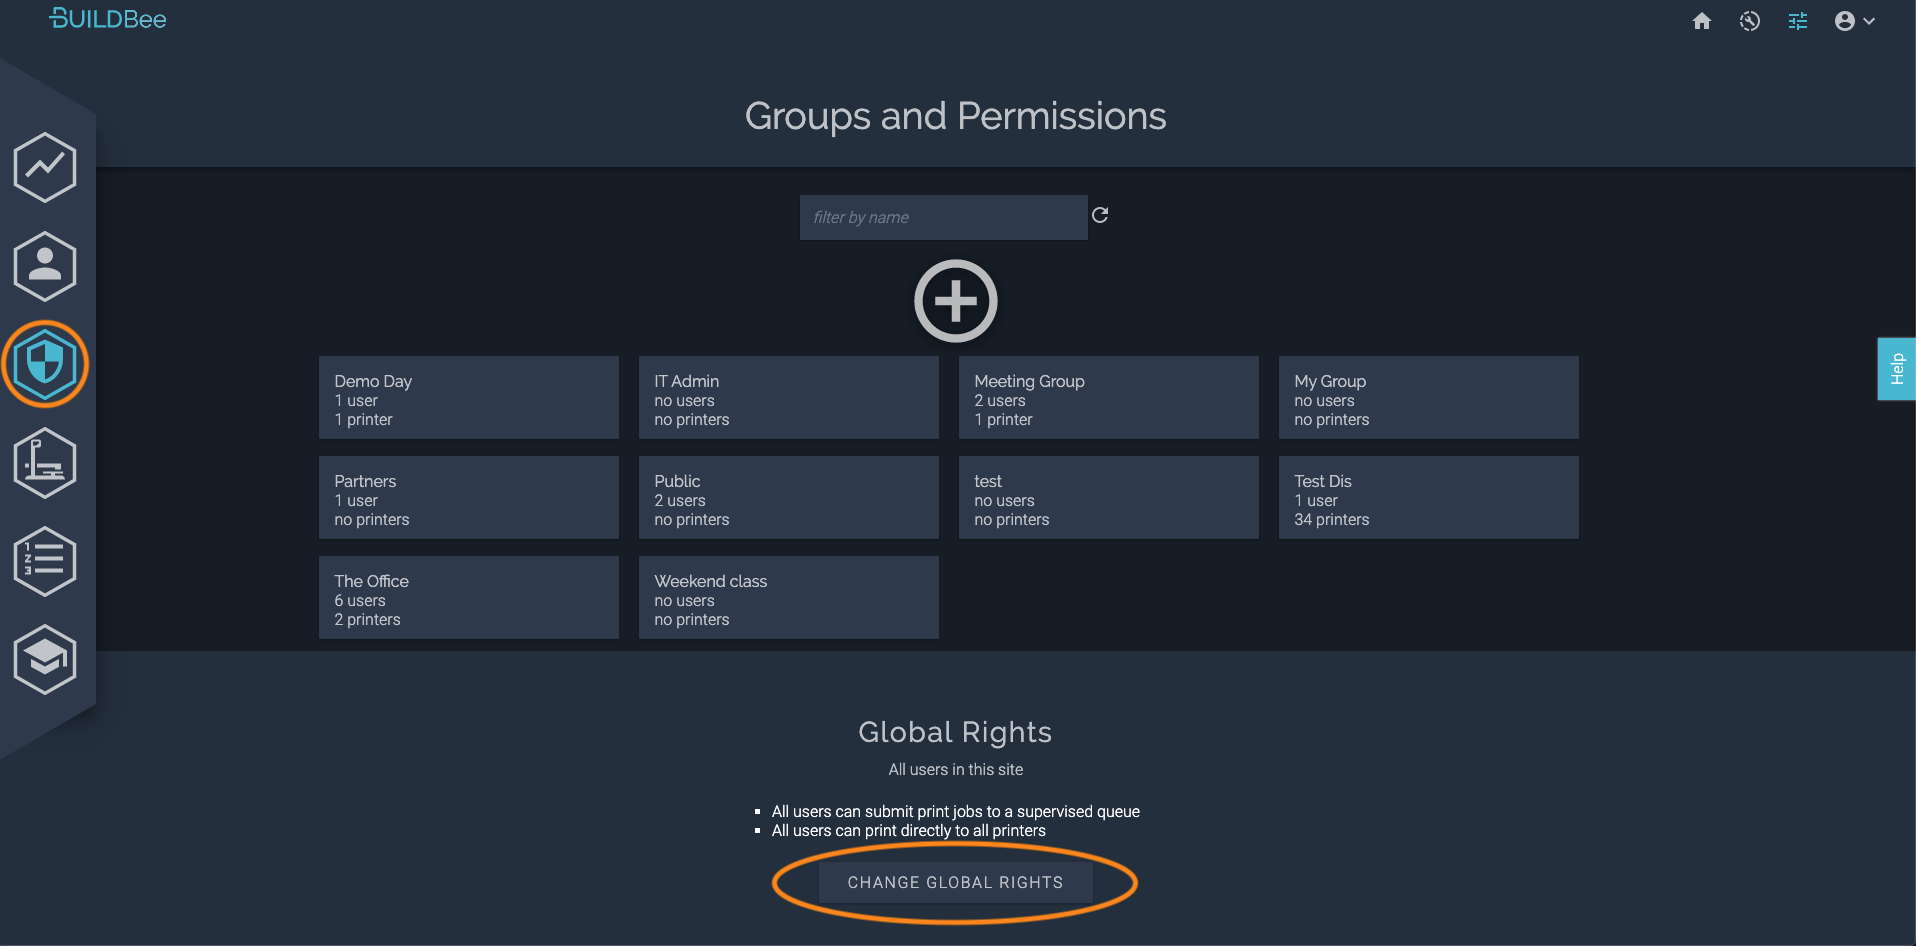 BuildBee groups and permissions